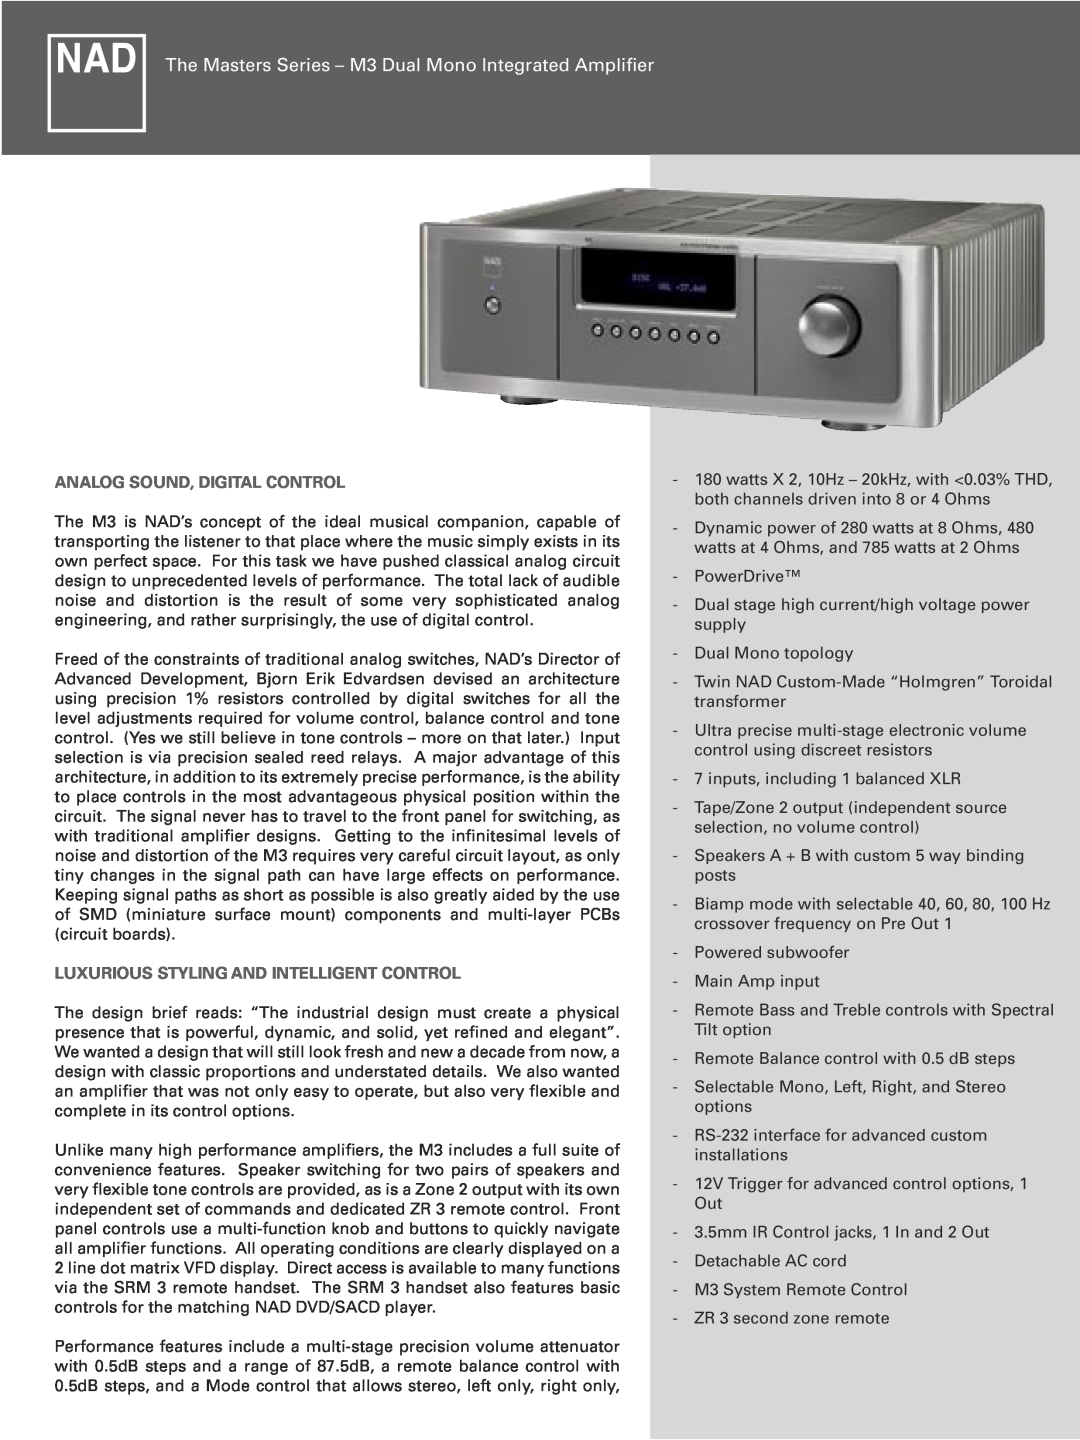 NAD M3 manual Analog Sound, Digital Control, Luxurious Styling And Intelligent Control 